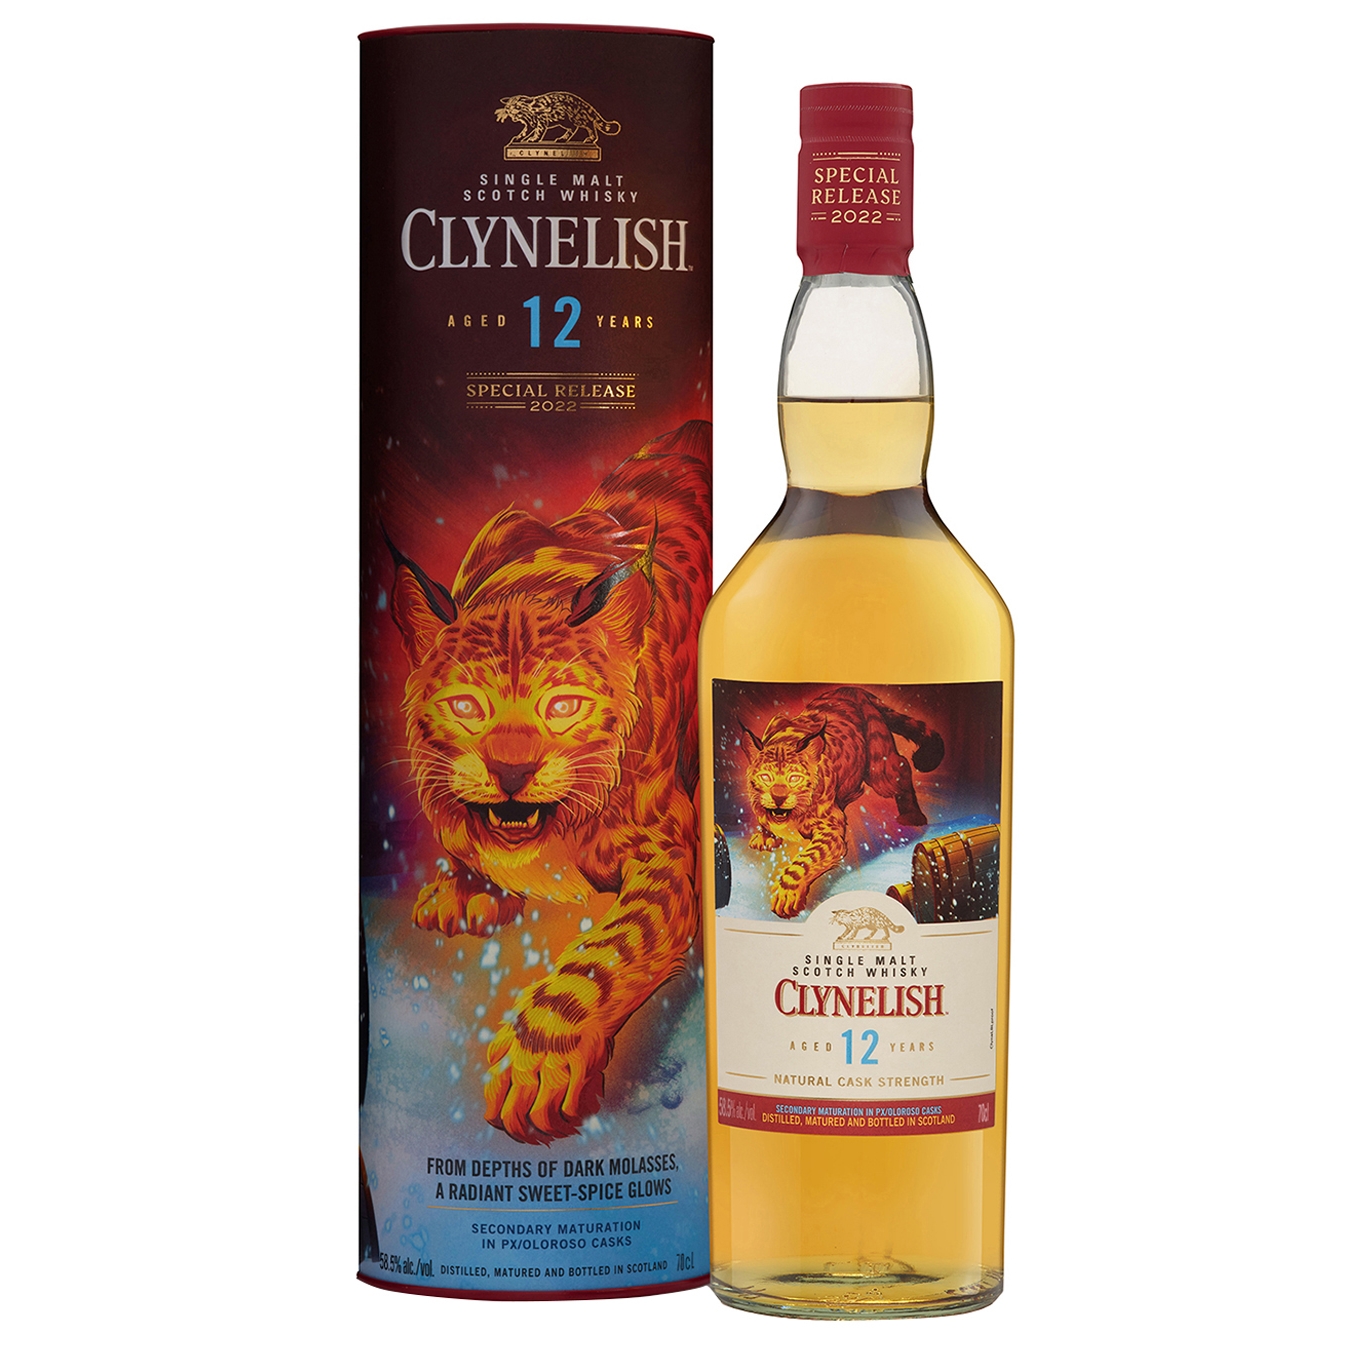 Clynelish 12 Year Old Single Malt Scotch Whisky Special Release 2022